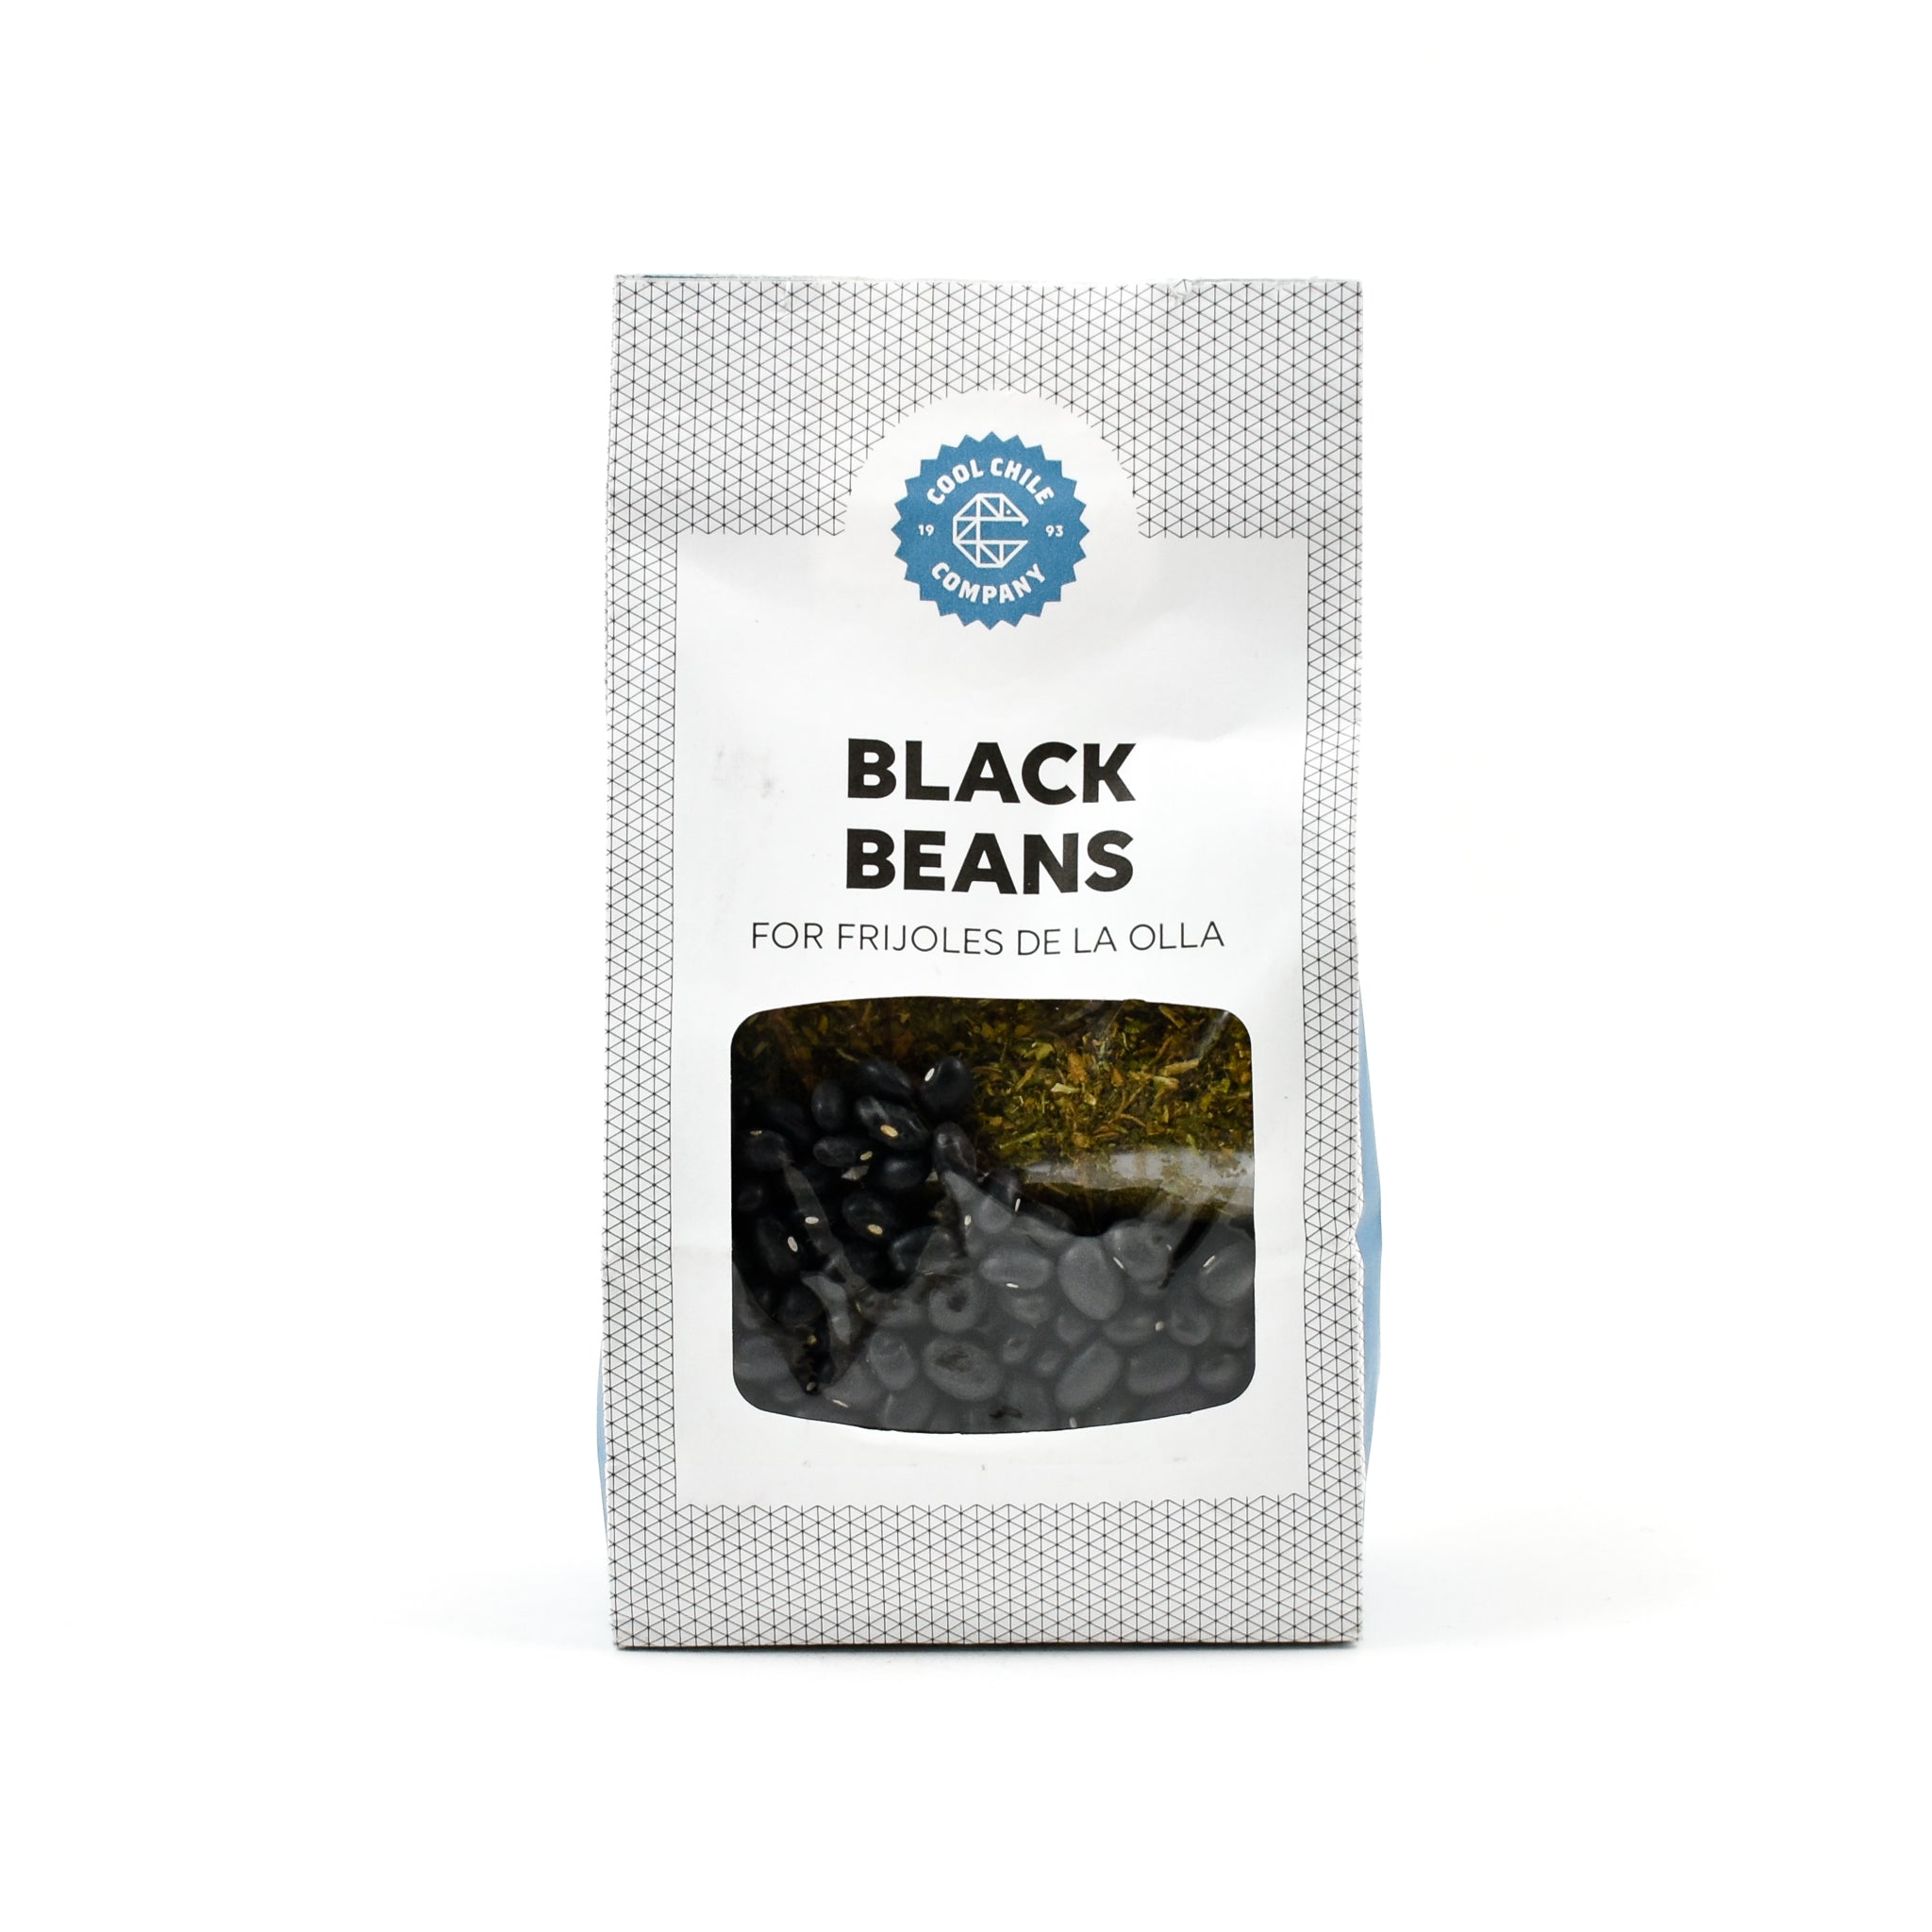 Cool Chile Co Black Bean Kit 250g Ingredients Mexican Food